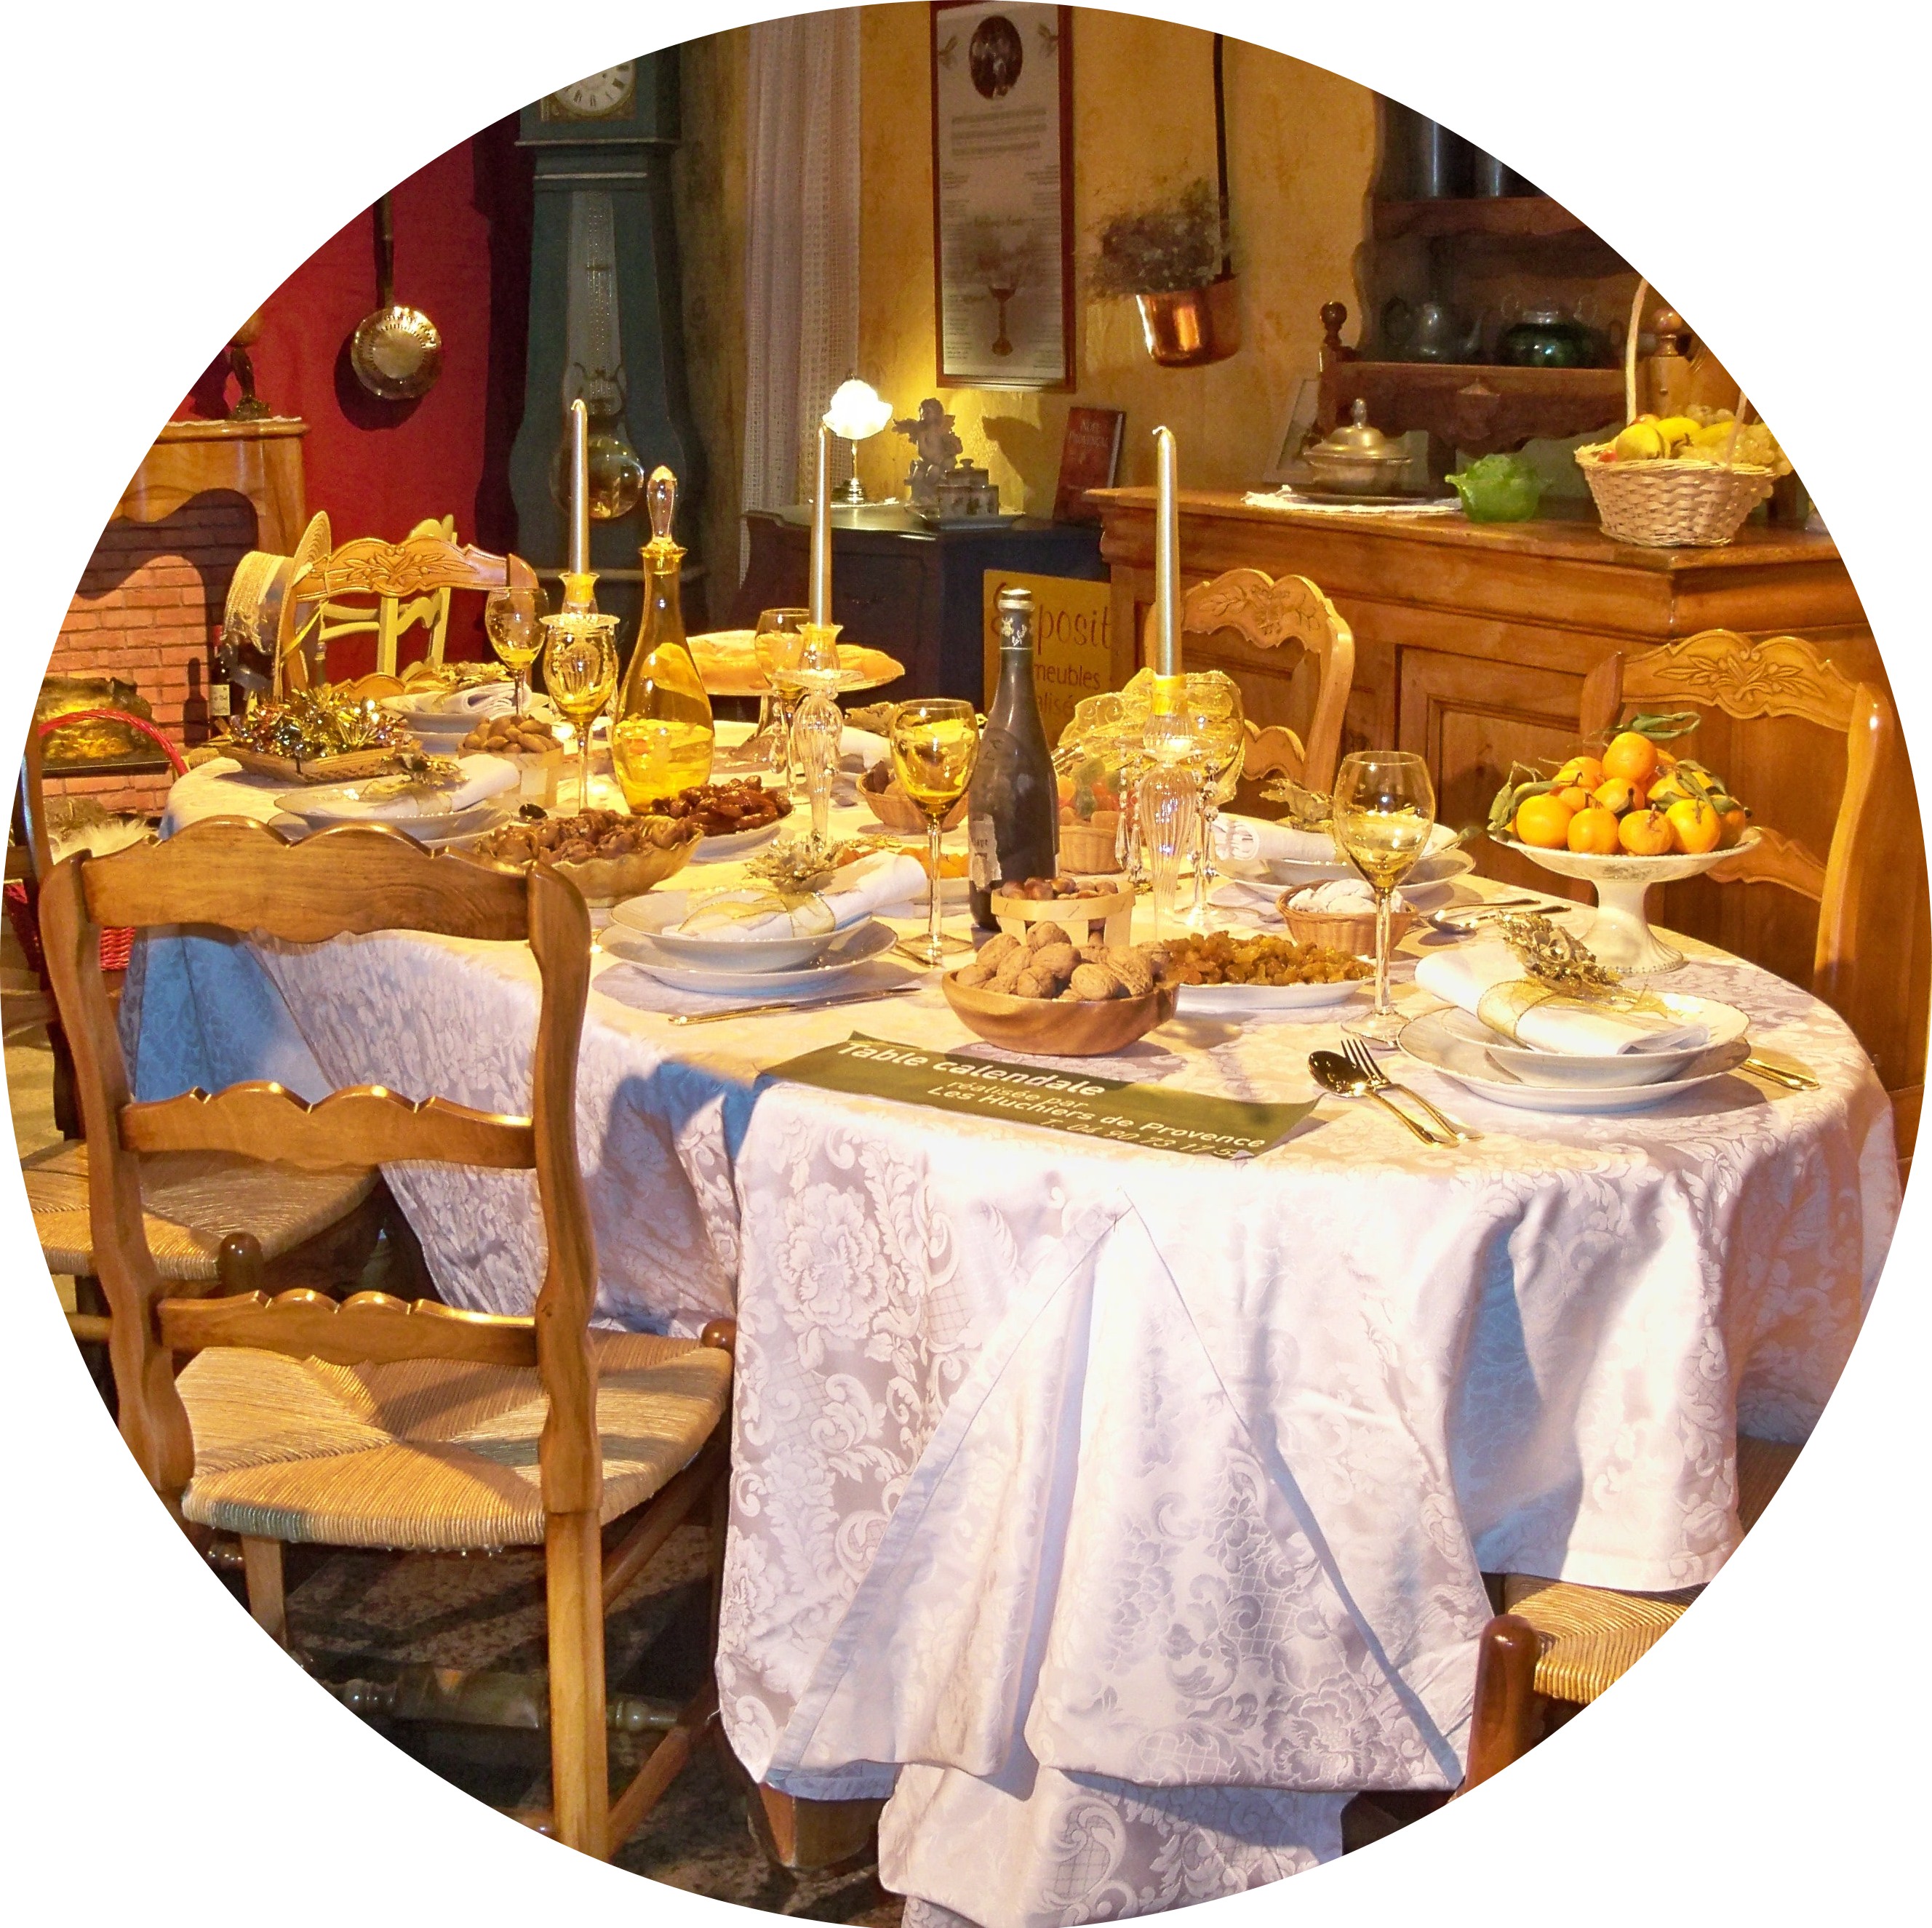 MyFrenchLife™ - MyFrenchLife.org - Jan_Leishman - Exploring_Provence_Christmas - gros_souper_table